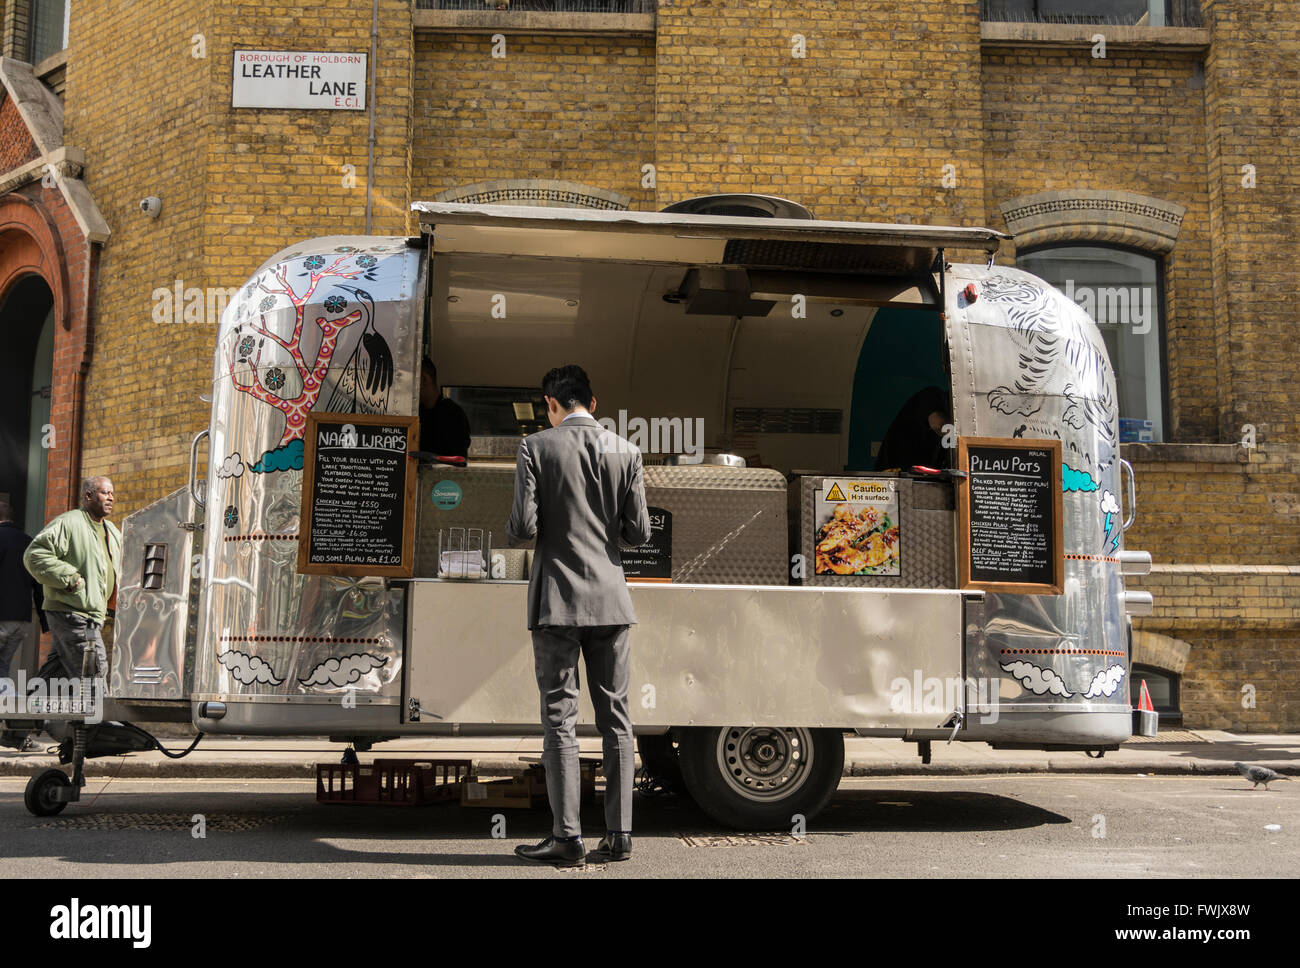 A smartly dressed man purchases a Naan wrap from a shiny Revival Trailer street stall seller on Leather Lane in London, UK. Stock Photo